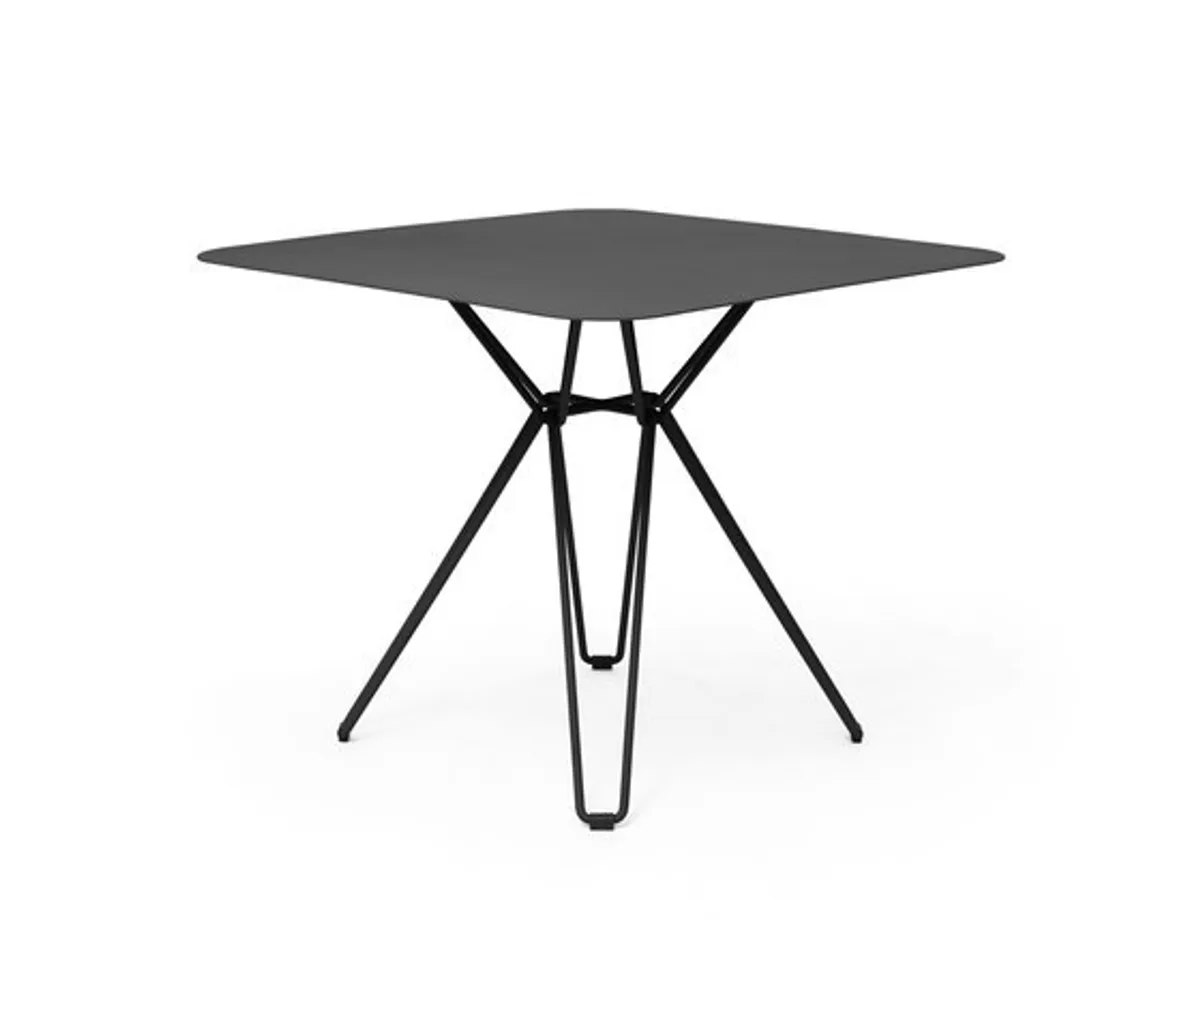 Tio Square Dining Table 02 Inside Out Contracts